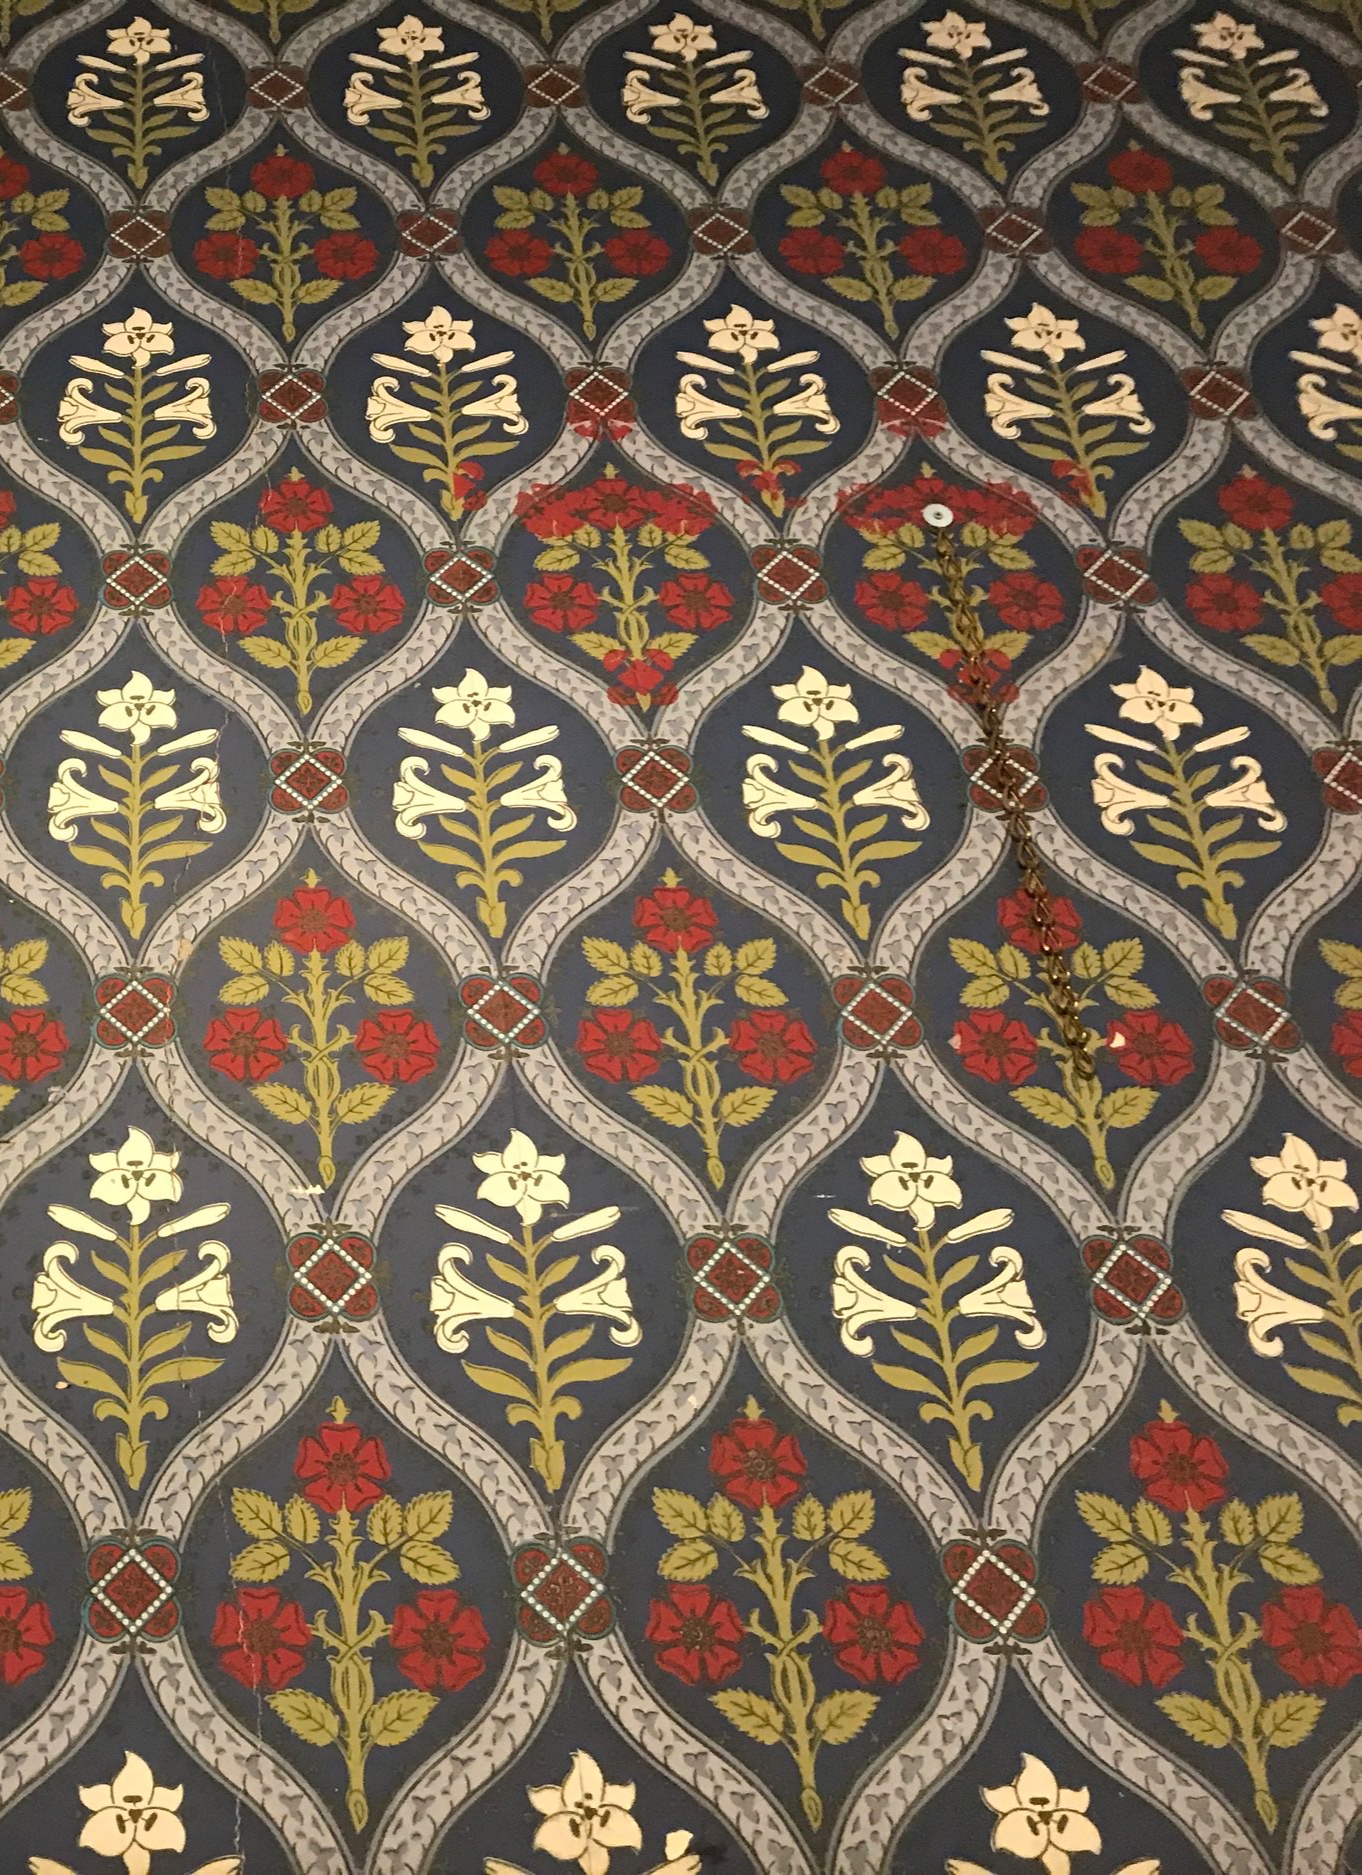 Wallpaper, by A.W.N.Pugin. England, 19th century | V&A Images